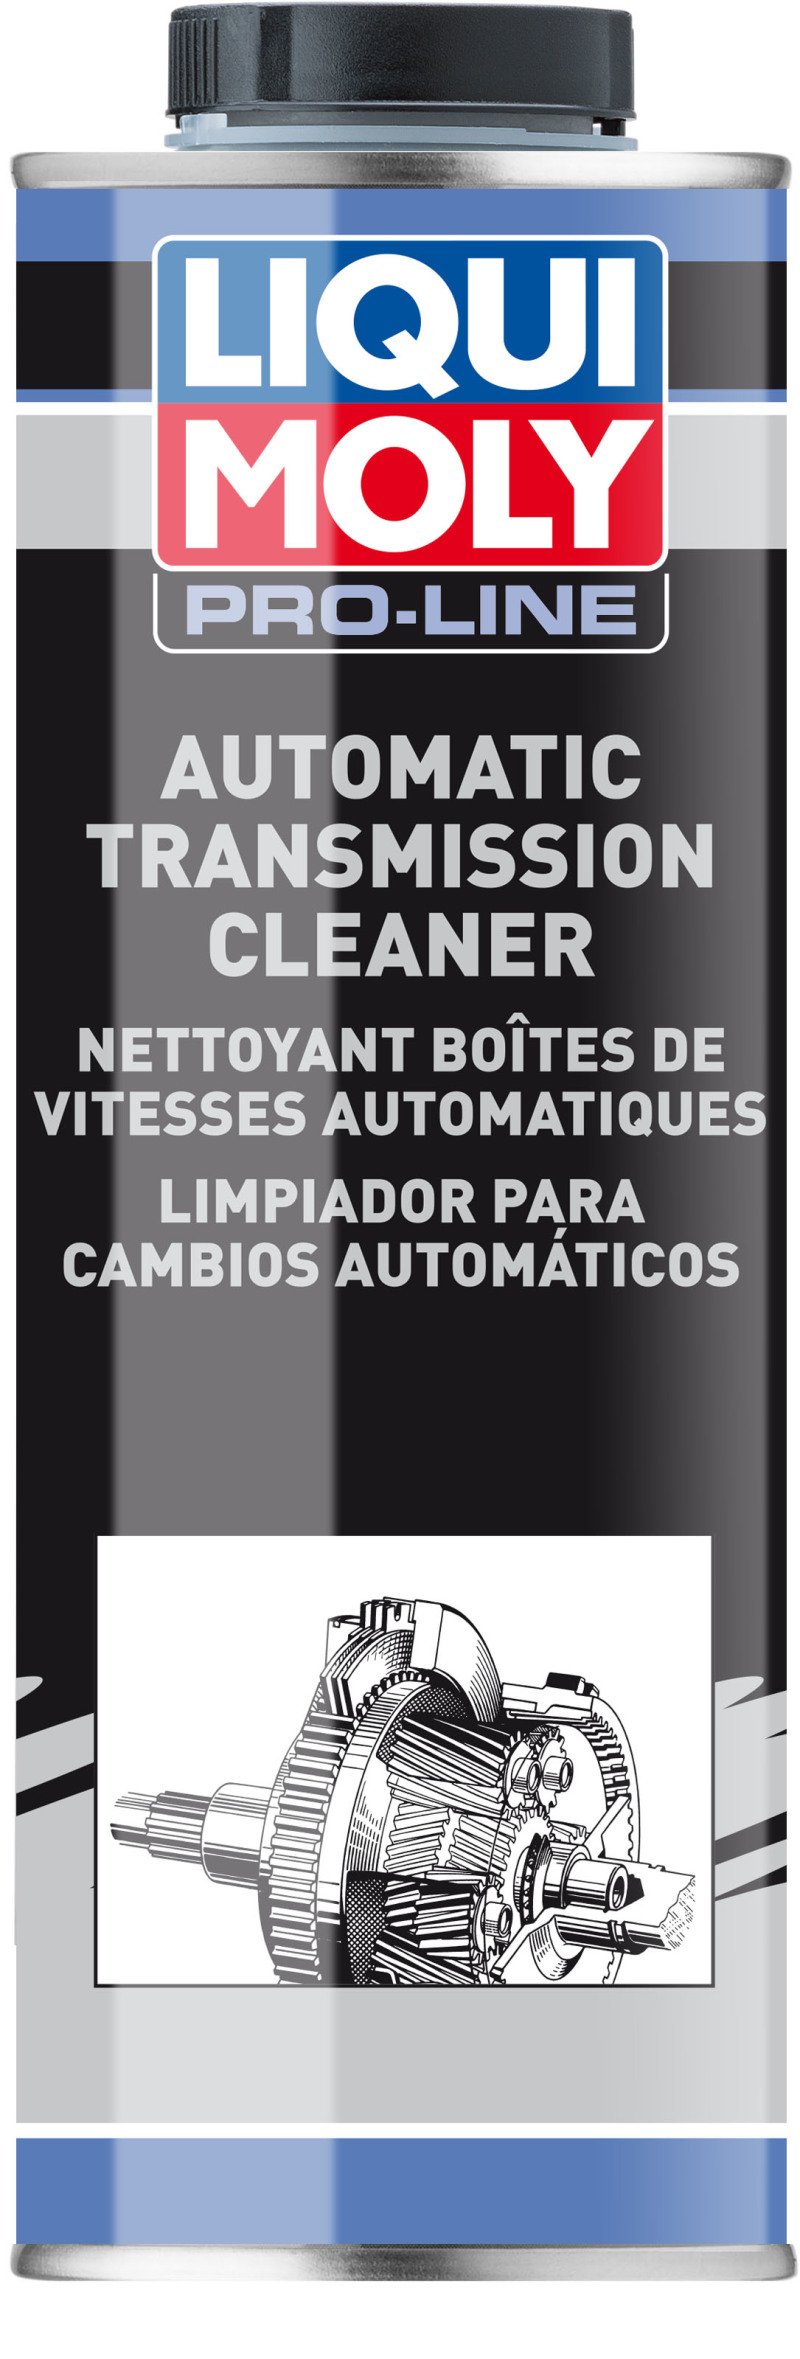 Pro-Line Automatic Transmission Cleaner - 20224